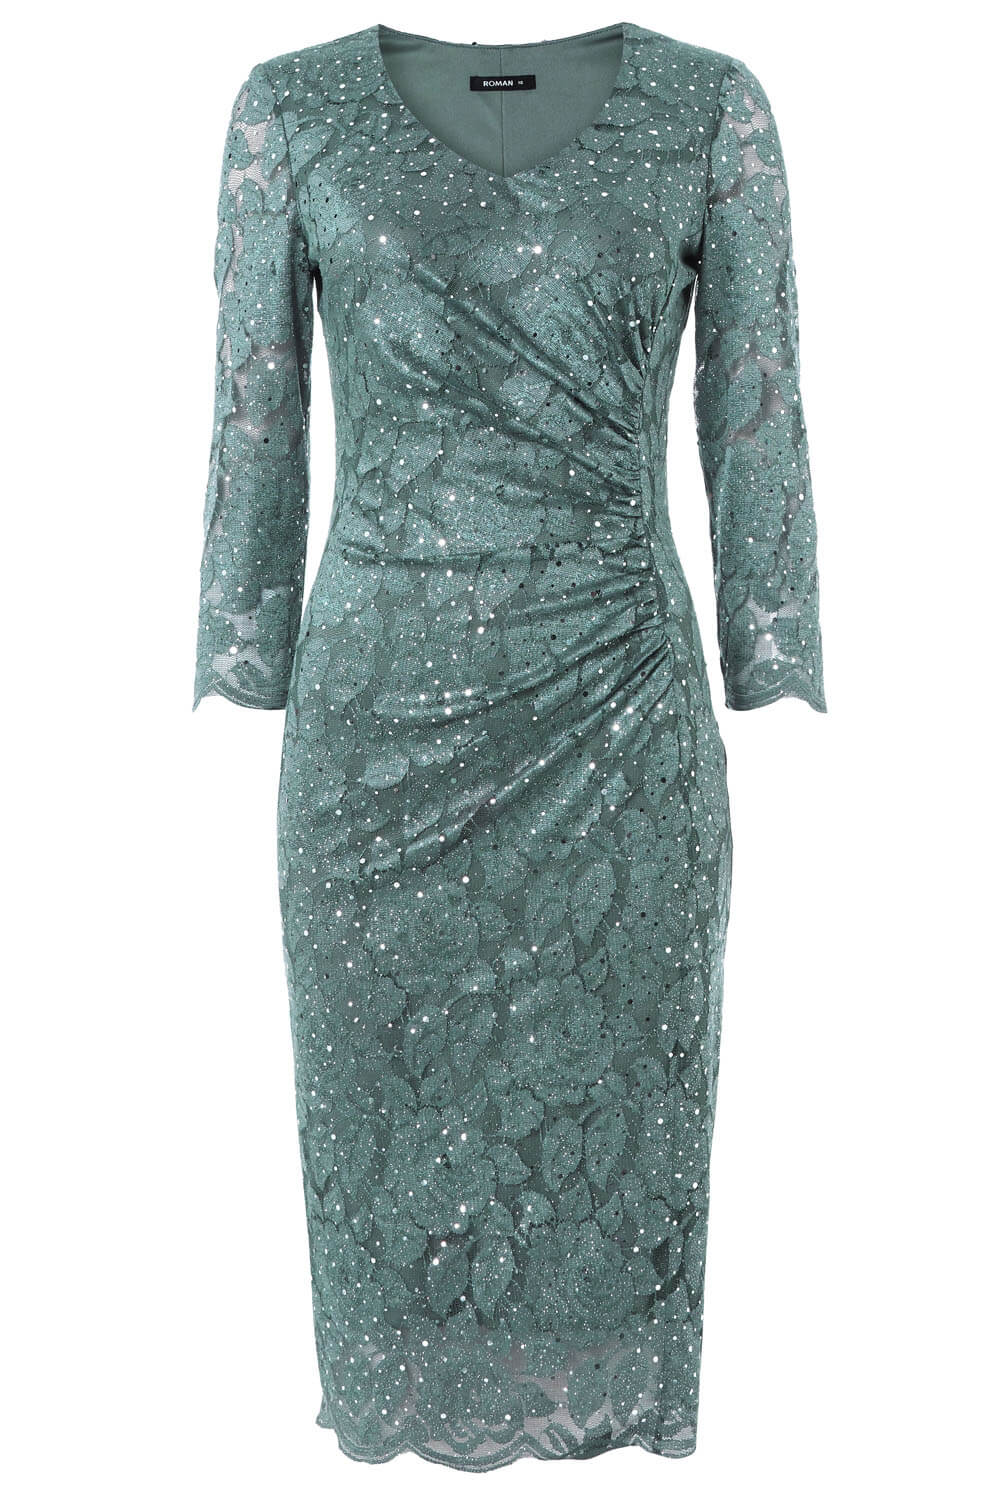 Green Lace Sequin Ruched Dress, Image 5 of 5